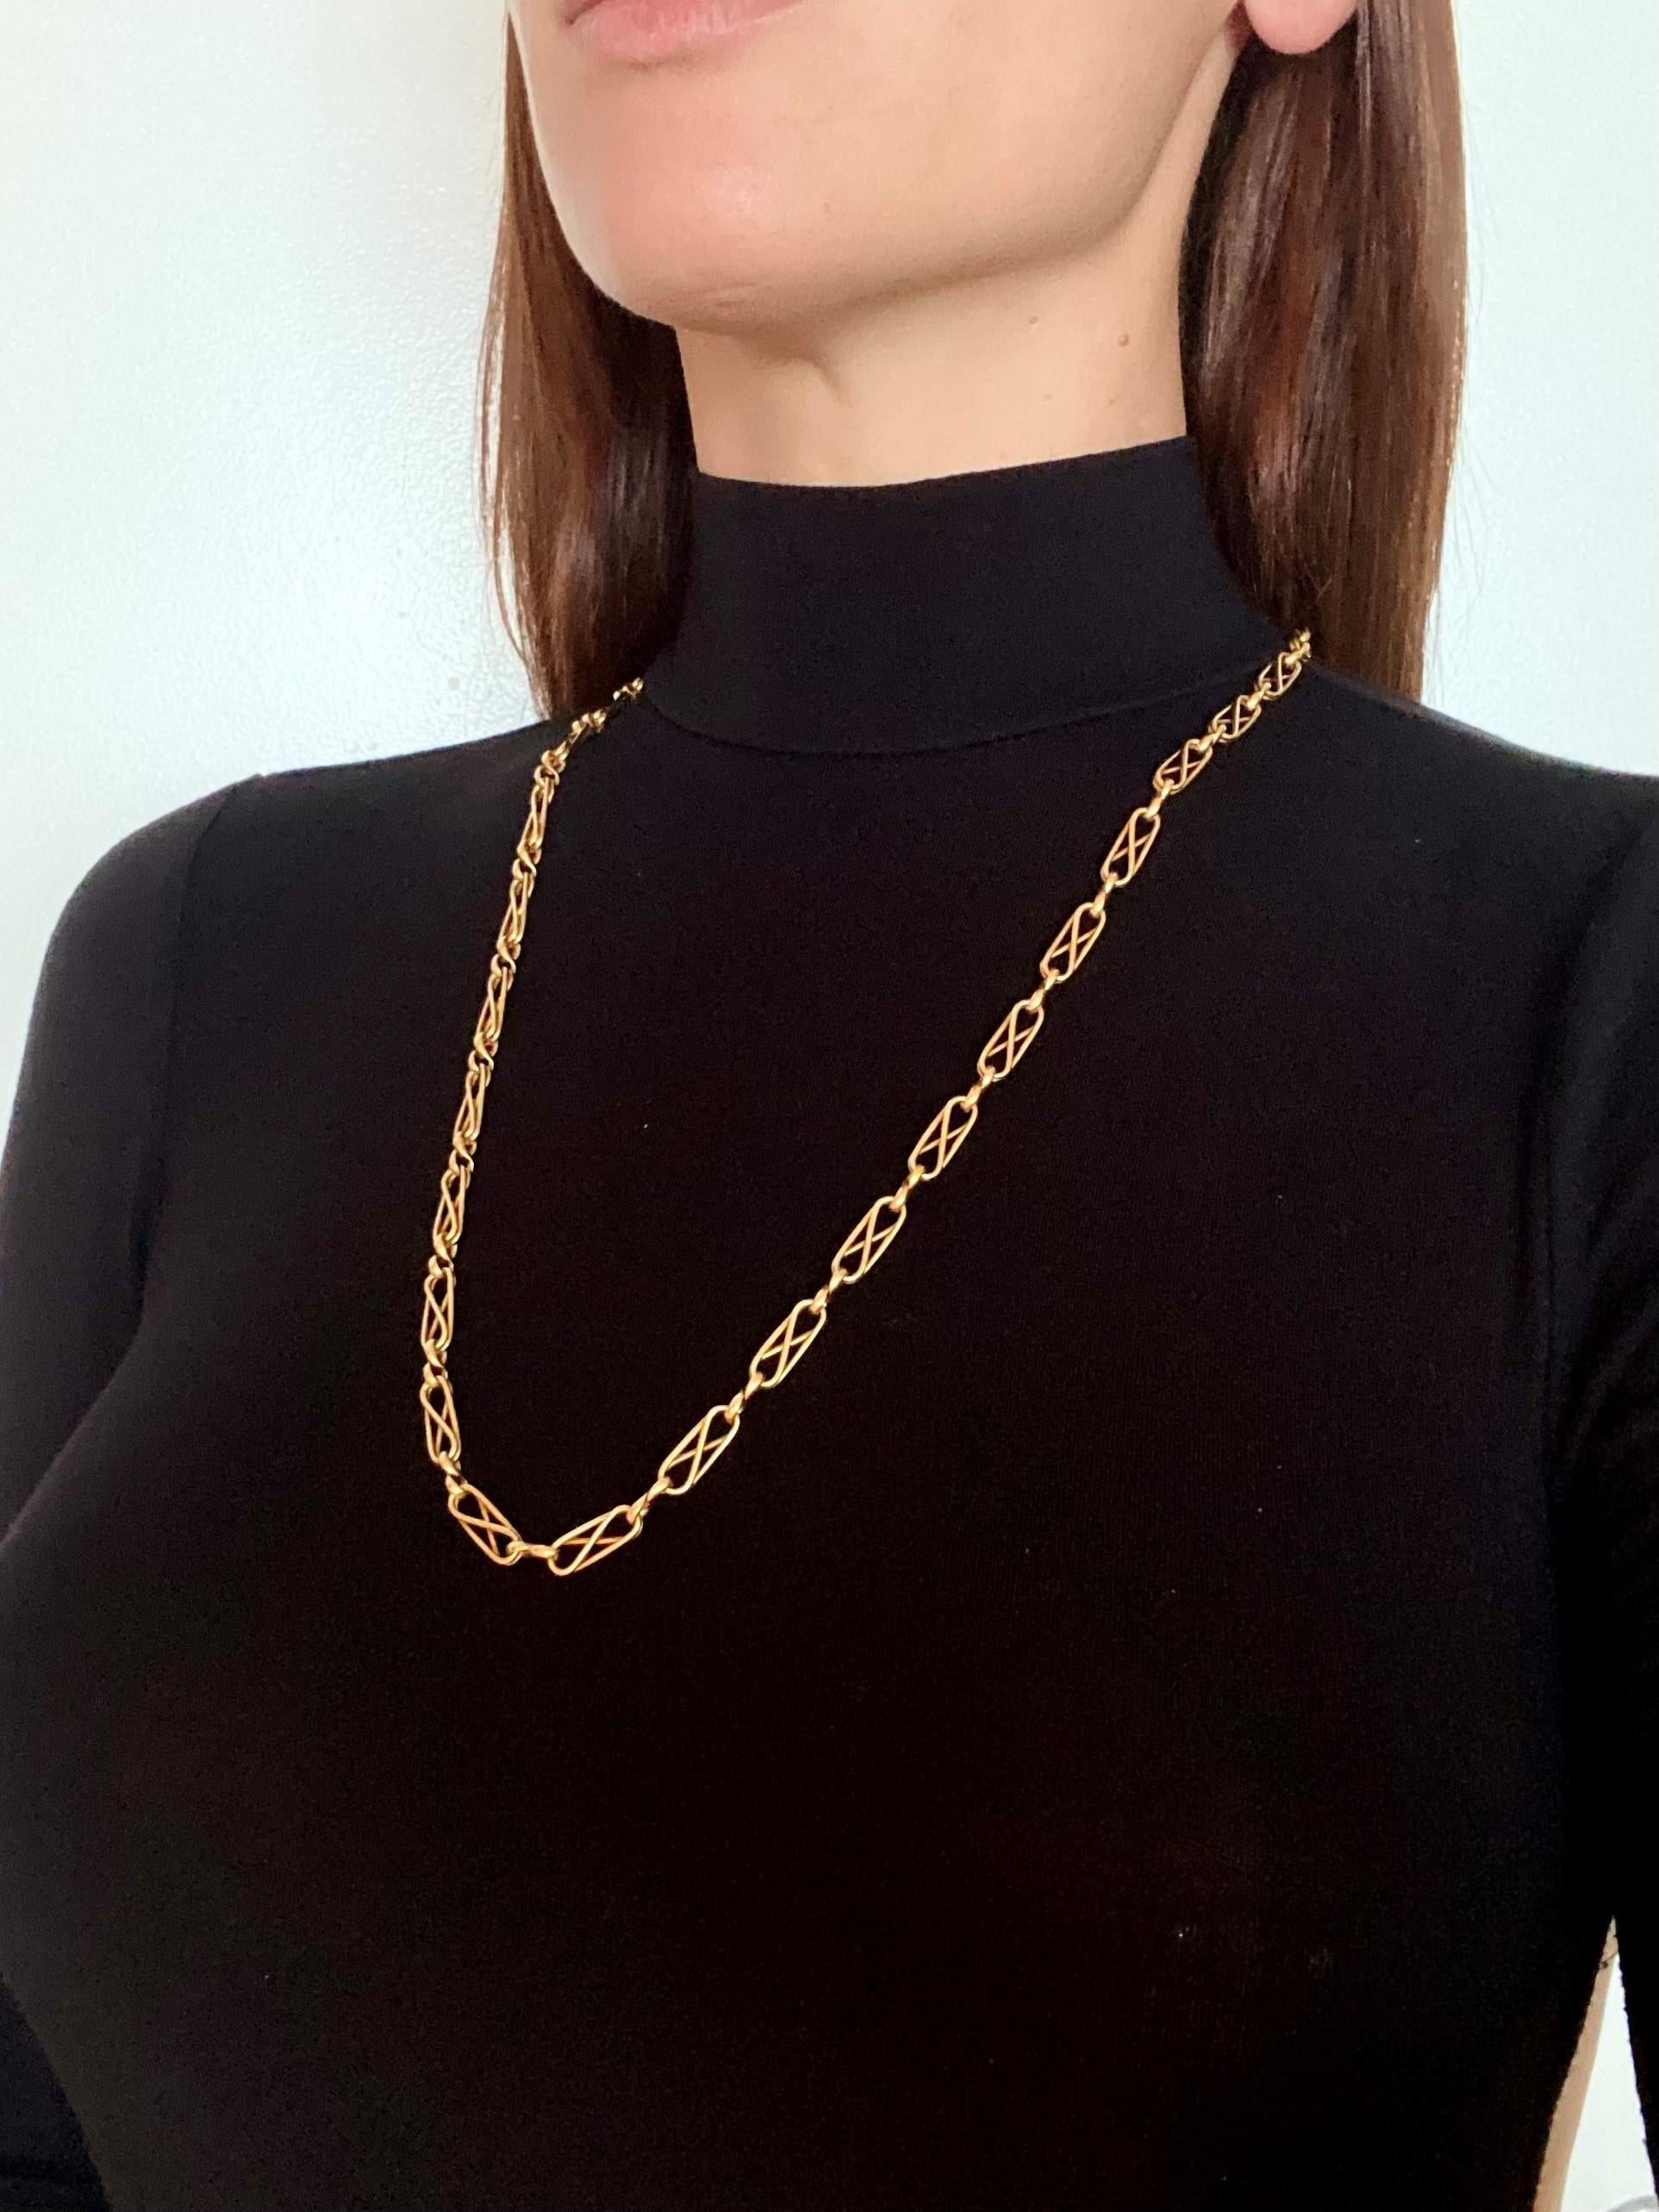 A rare Cartier chain designed by George L'enfant.

Beautiful chain created in Paris France at the jewelry atelier of George L'Enfant for the house of Cartier, back in the 1960. This fabulous chain has been crafted in solid yellow gold of 18 karats